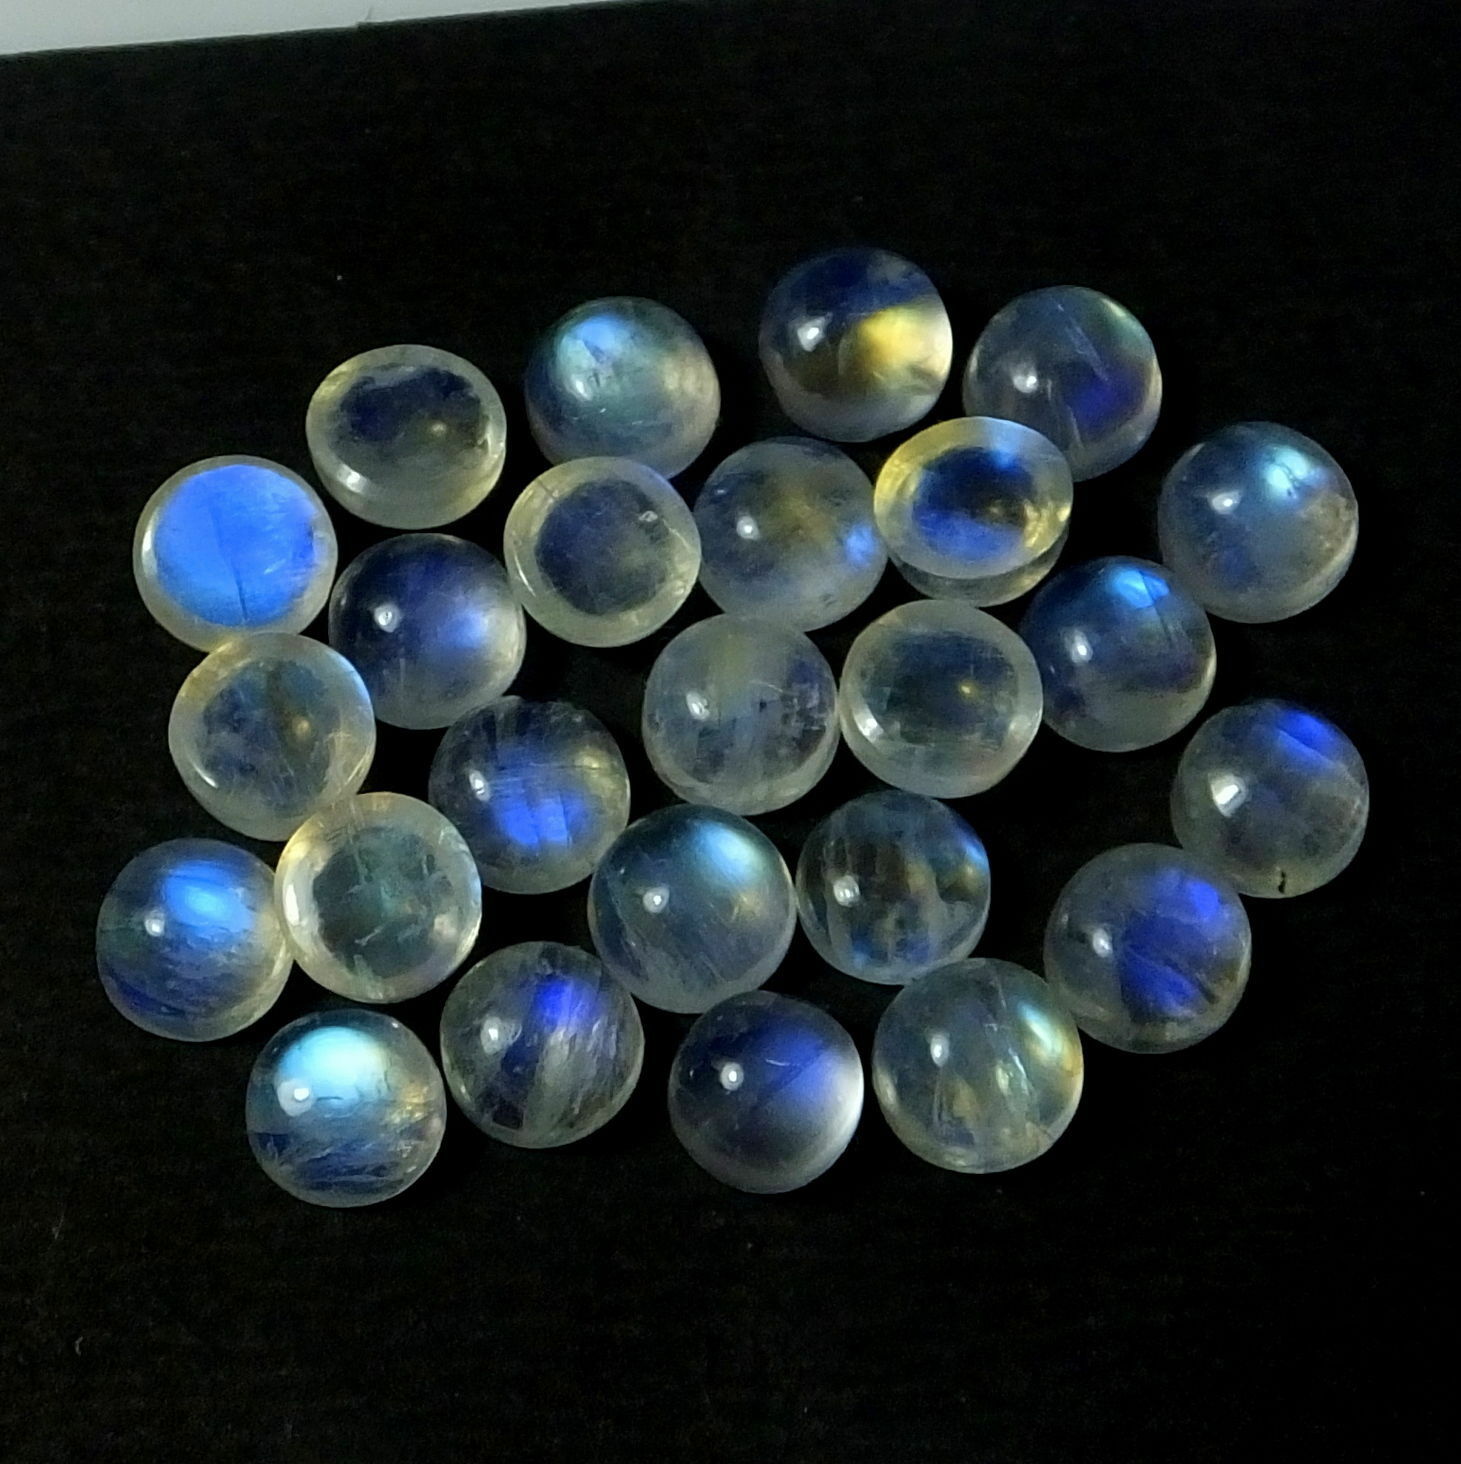 70% Off !! 3mm To 10mm Natural Rainbow Moonstone Round Cabochon Loose Gemstone